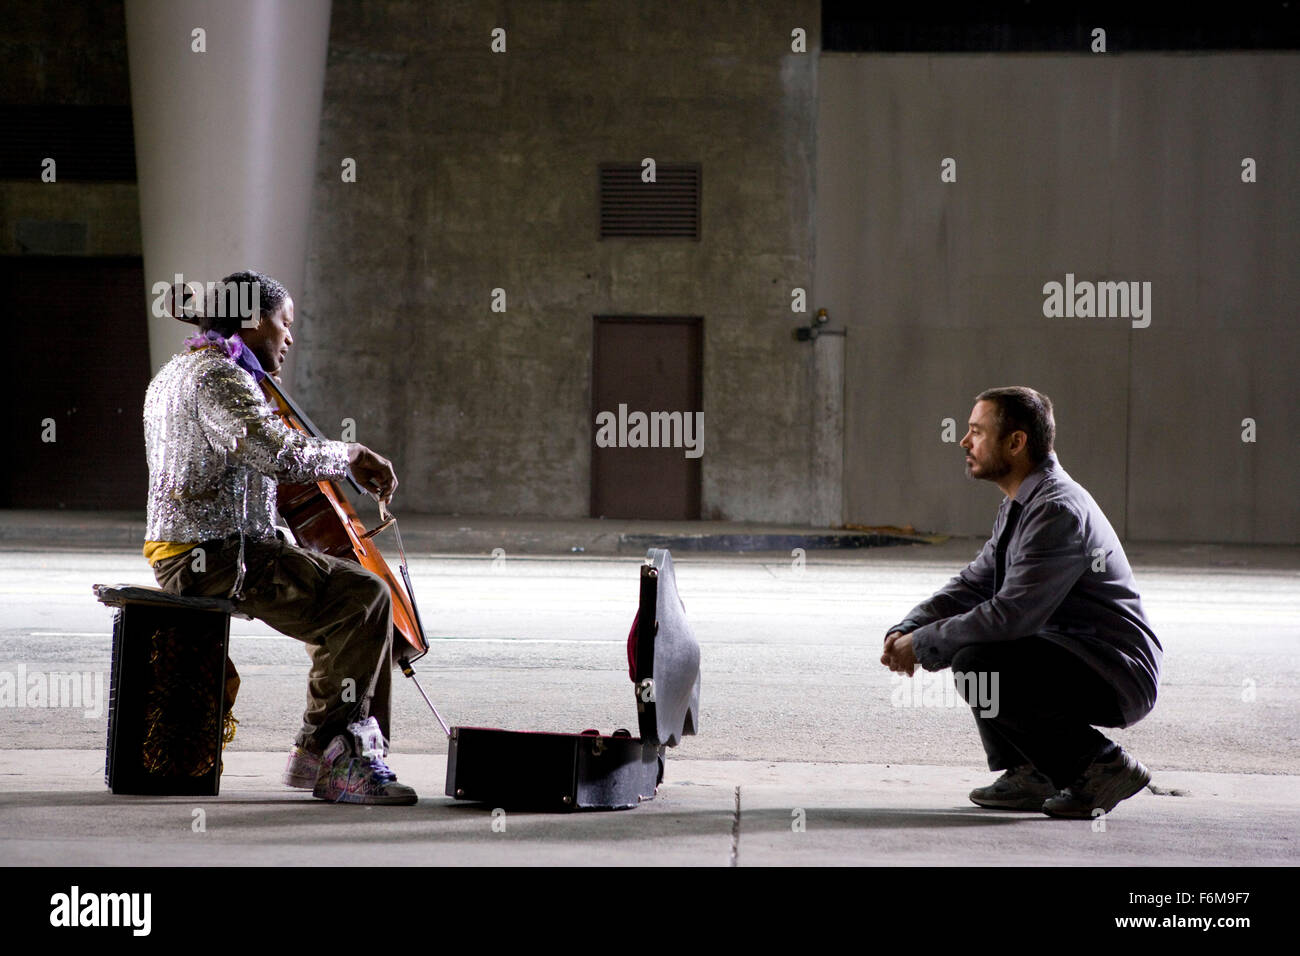 RELEASE DATE: April 24, 2009. MOVIE TITLE: The Soloist. STUDIO: Paramount Pictures. PLOT: A Los Angeles Journalist, befriends a homeless Julliard trained musician, while looking for a new article for the paper. PICTURED: JAMIE FOXX as Nathaniel Ayers and ROBERT DOWNEY as Steve Lopez. Stock Photo